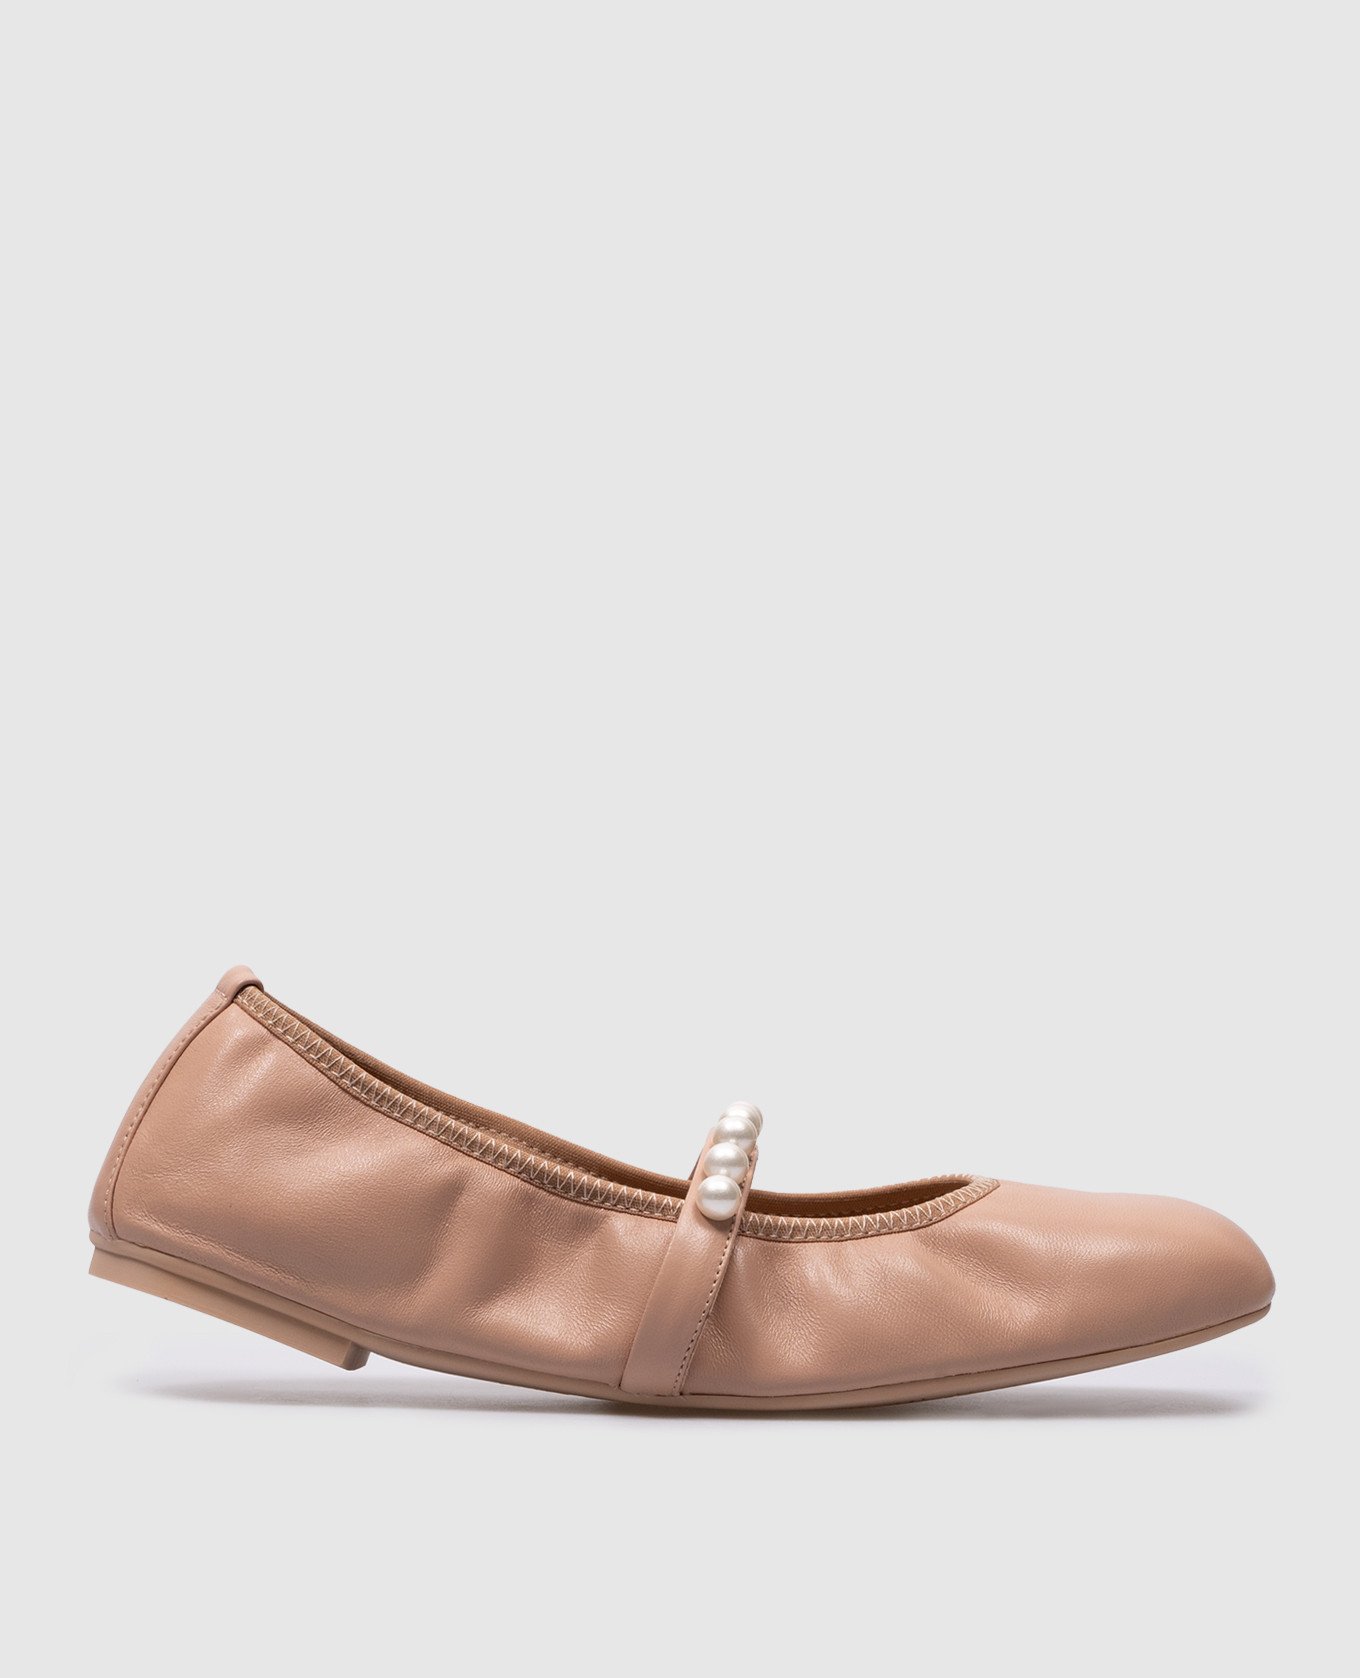 Goldie pink beaded leather ballet flats